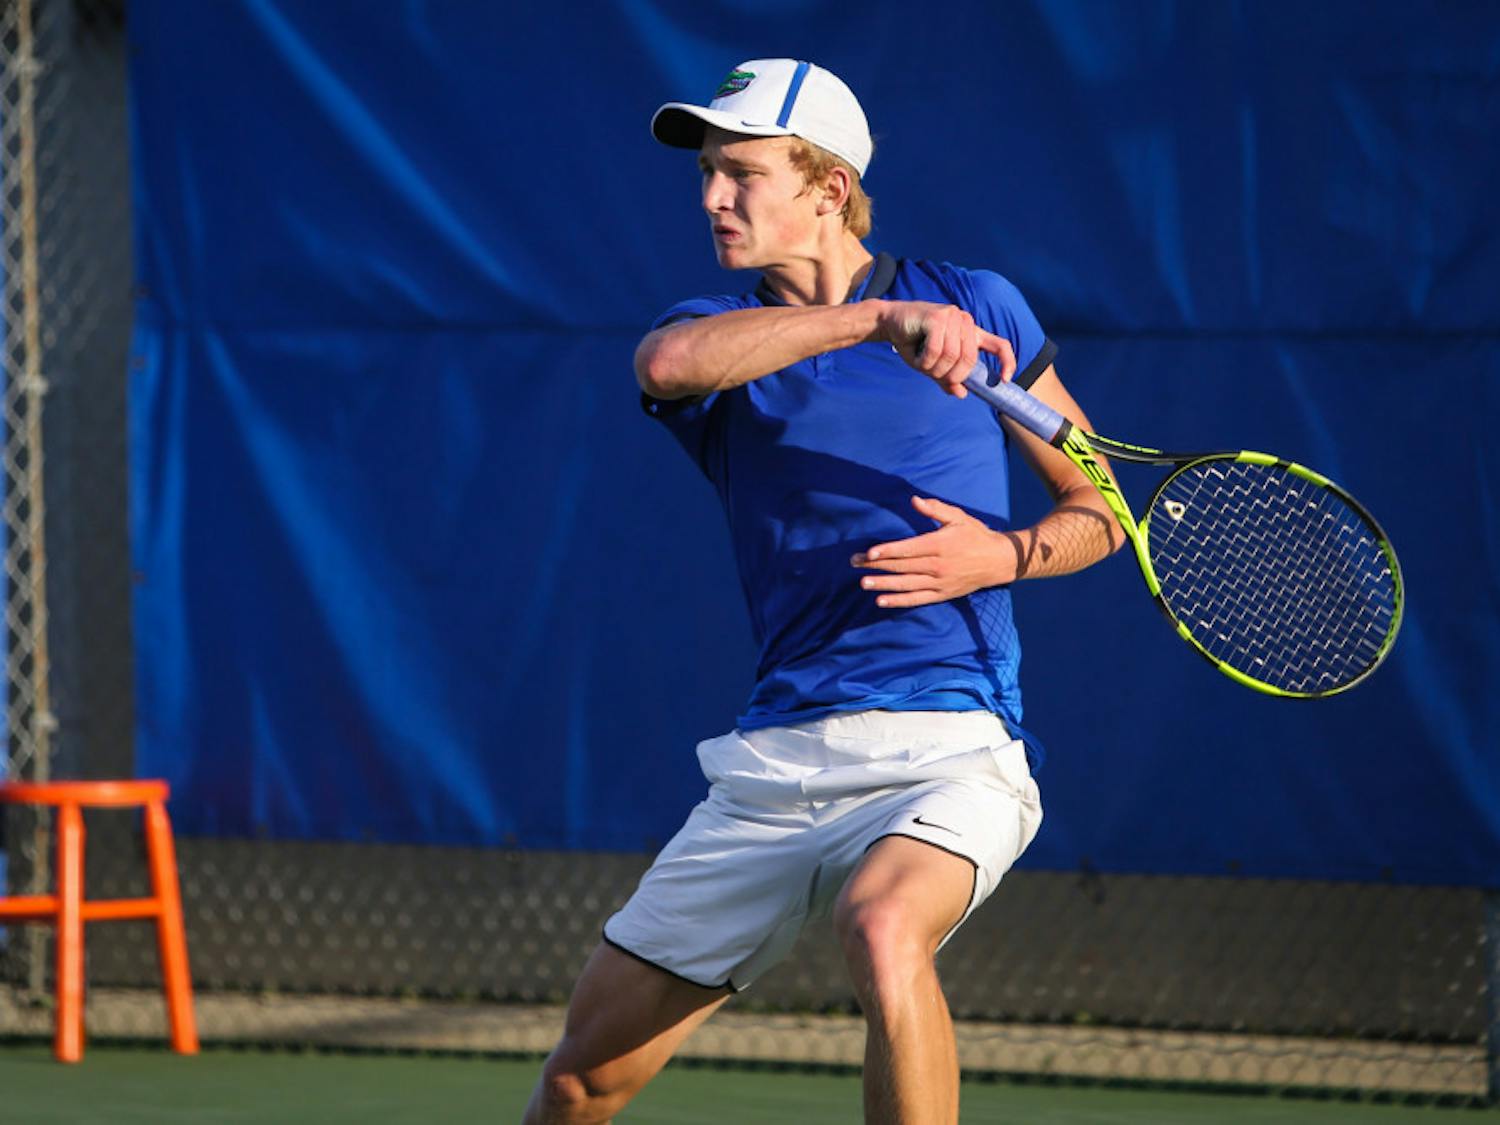 The Gators men's tennis team eliminated FSU and advanced to the Sweet 16 on Saturday. 